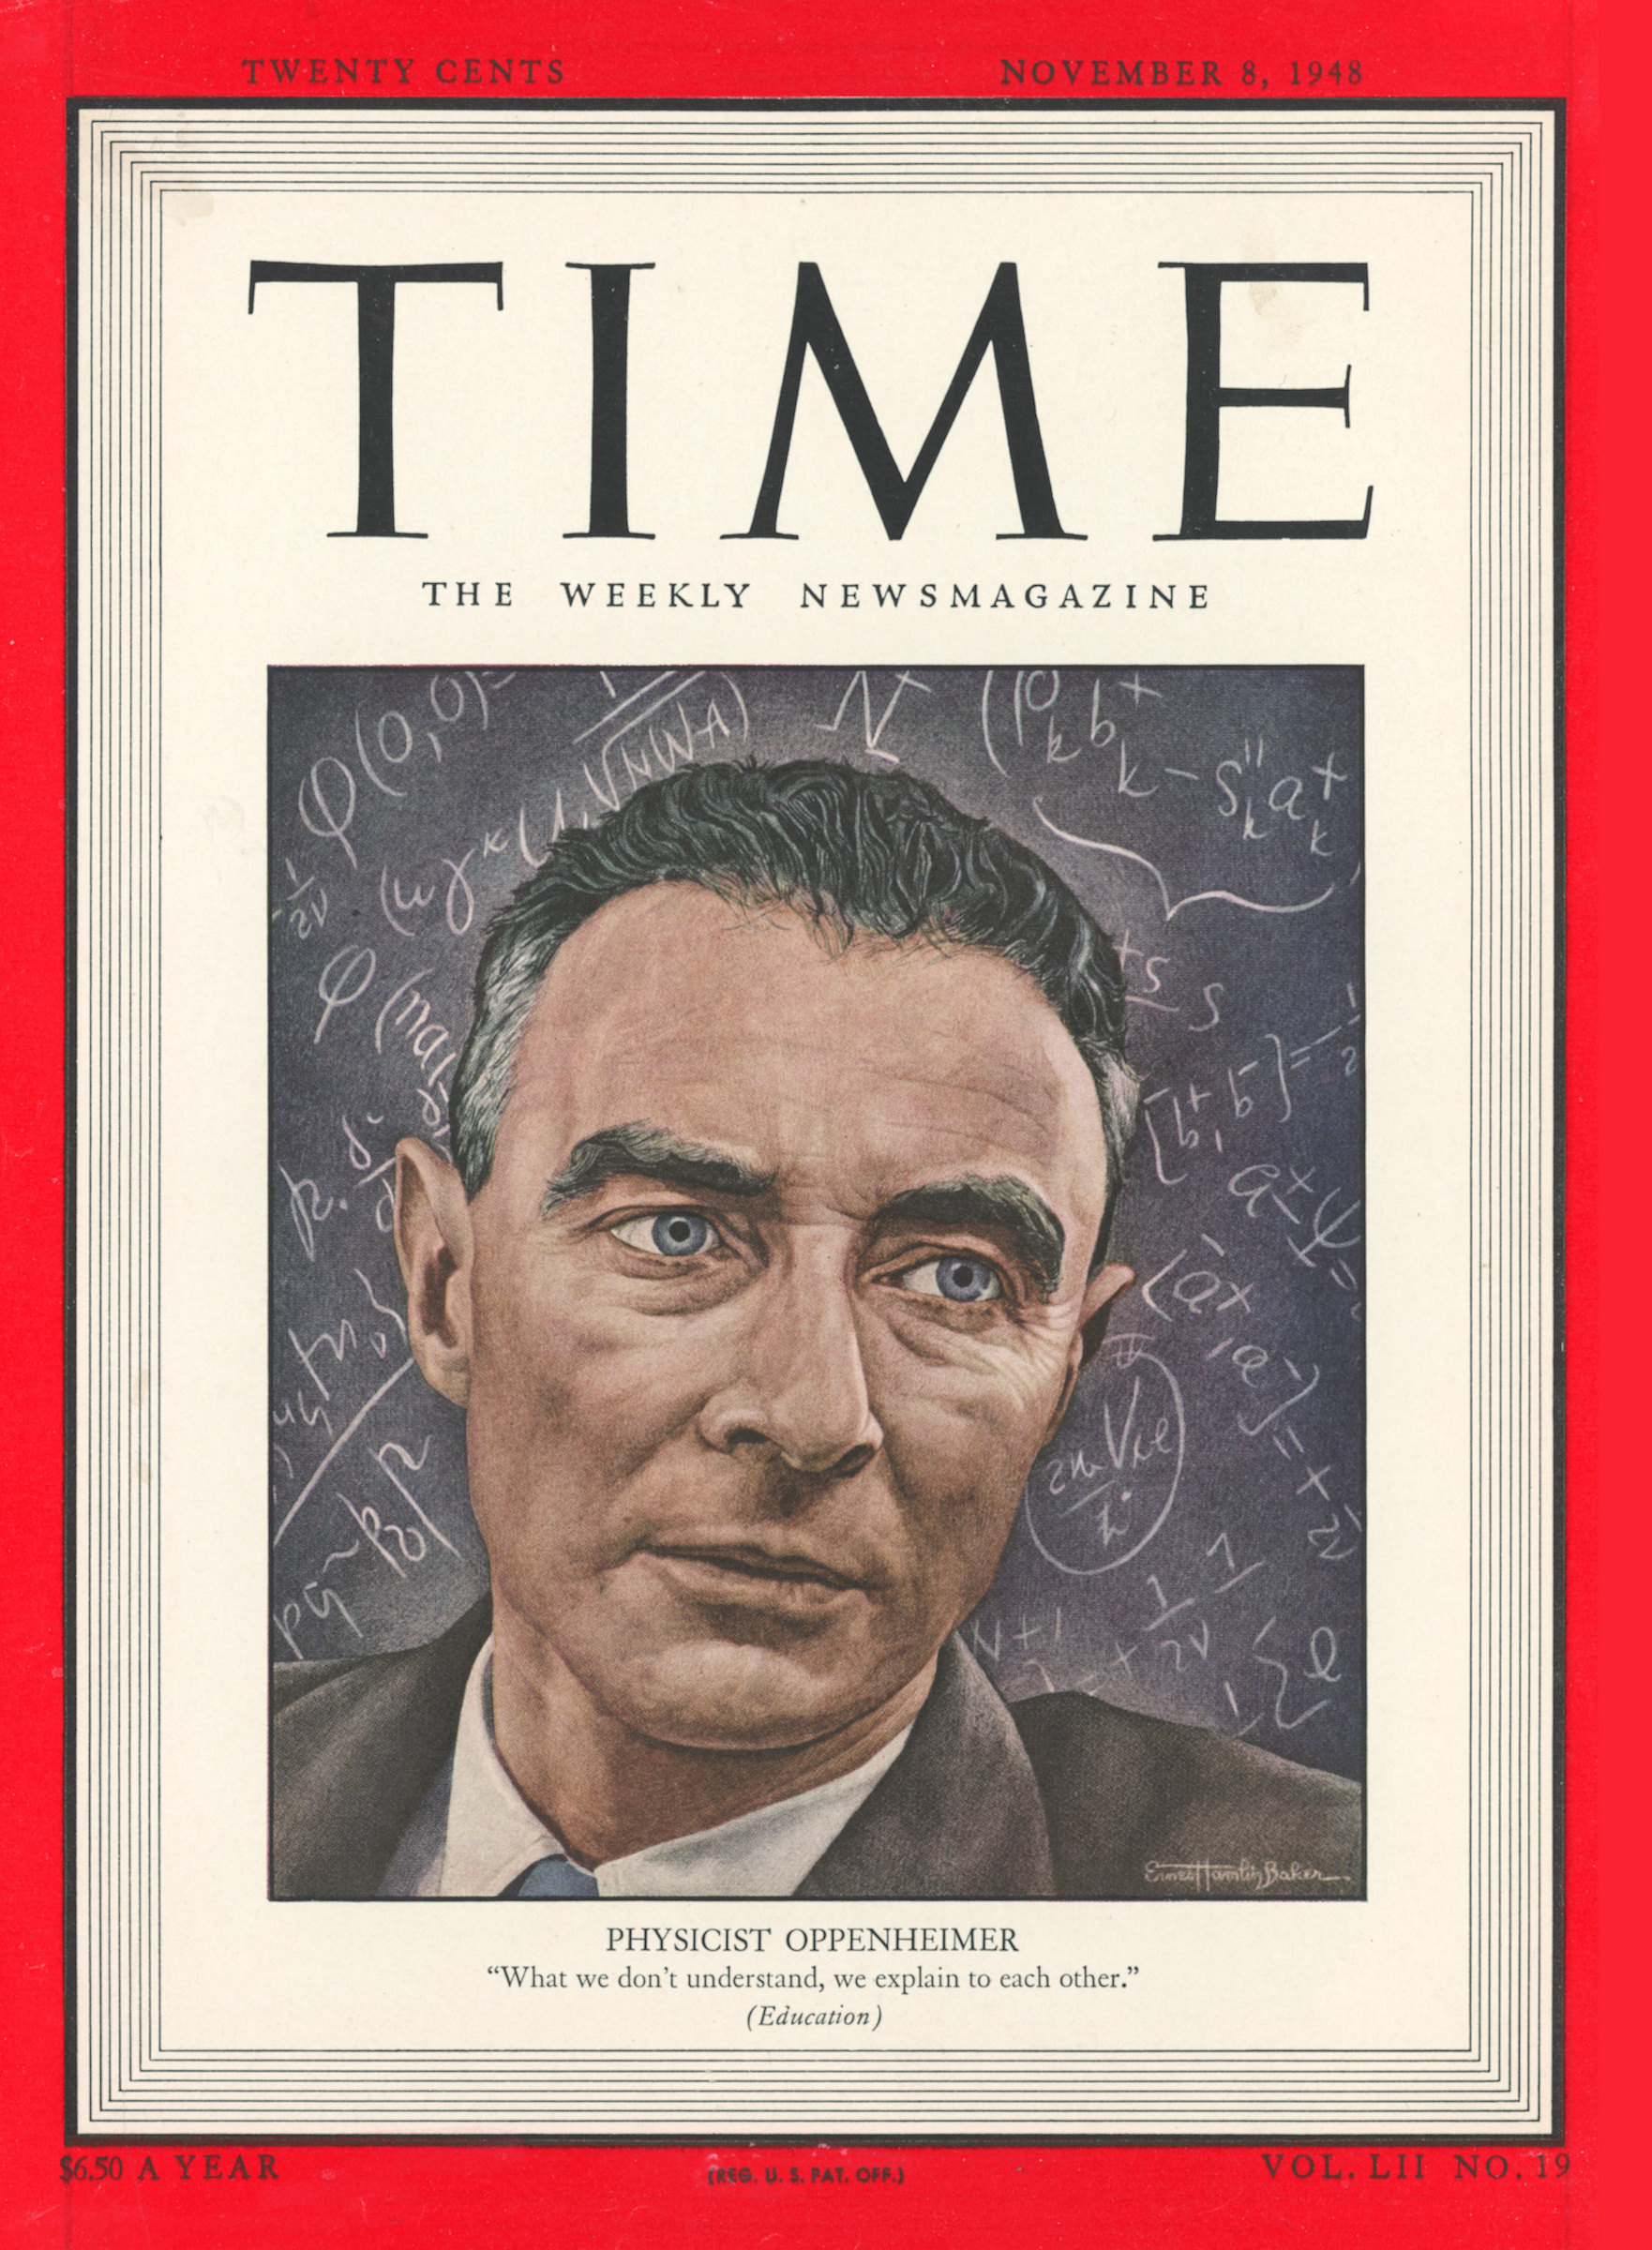 The Real TIME Magazine Covers Featured in Oppenheimer